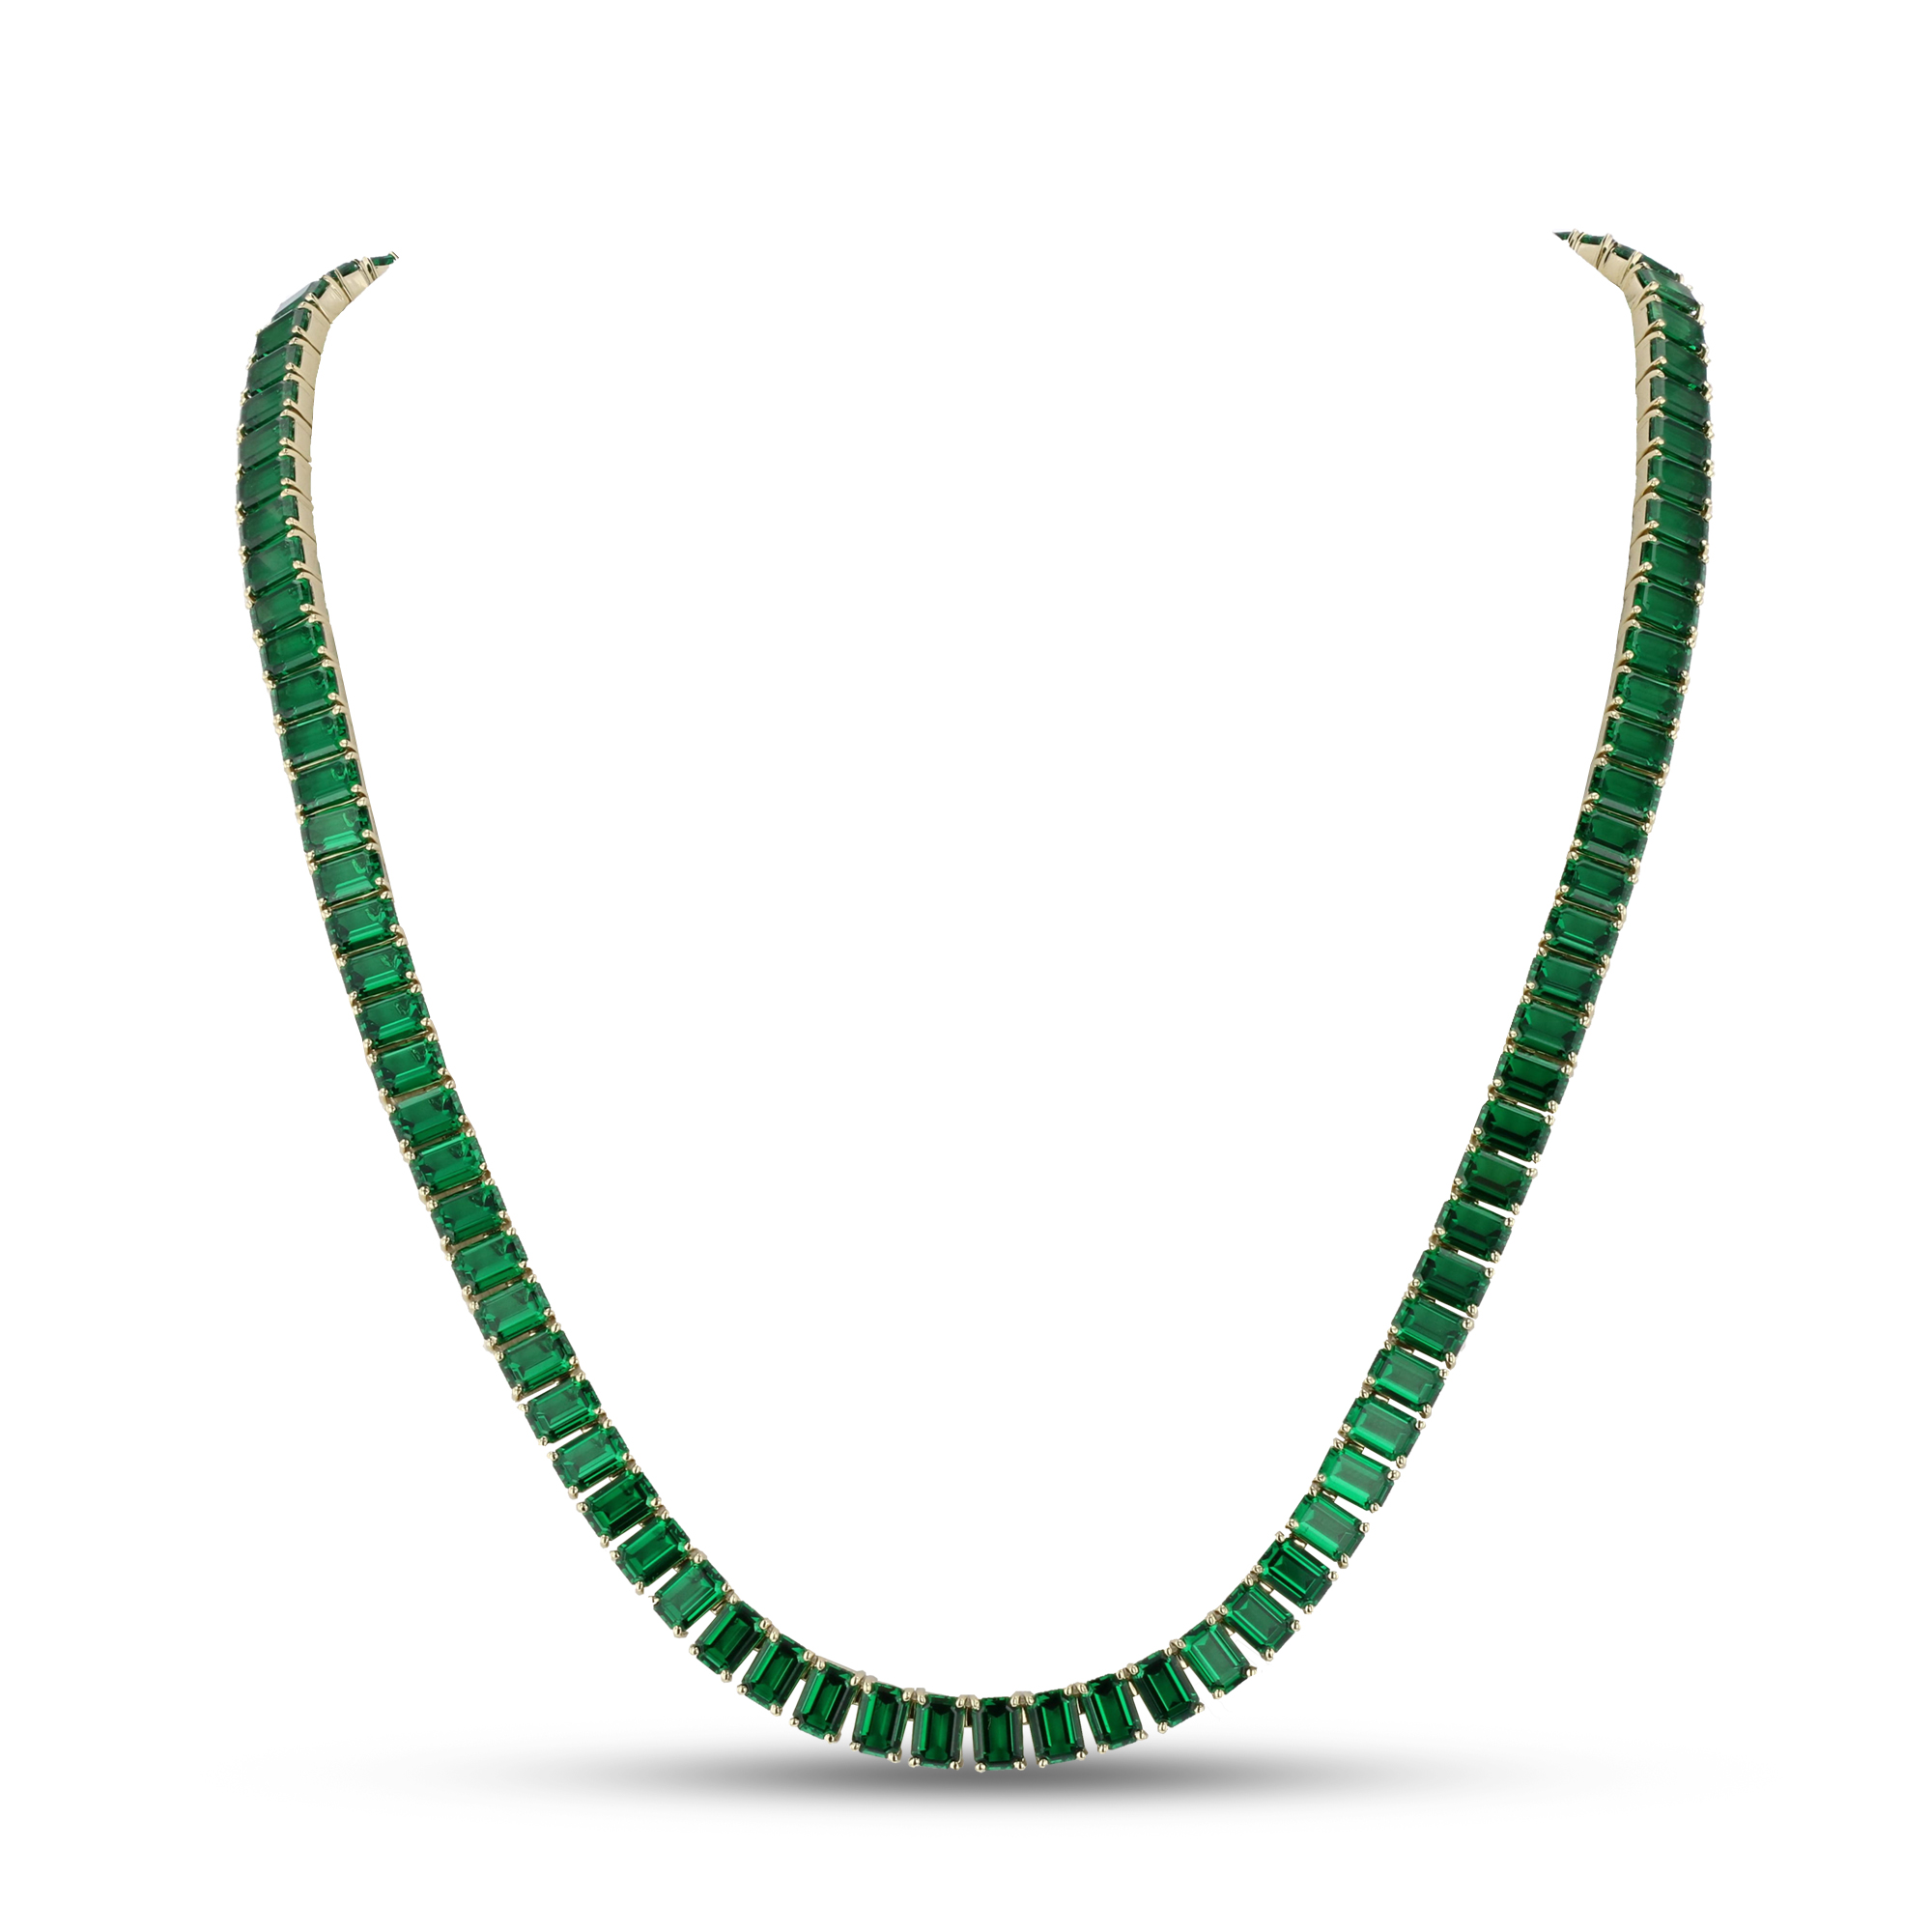 View 46.83ctw Emerald Cut Mano Crystal Necklace in 14k Yellow Gold 